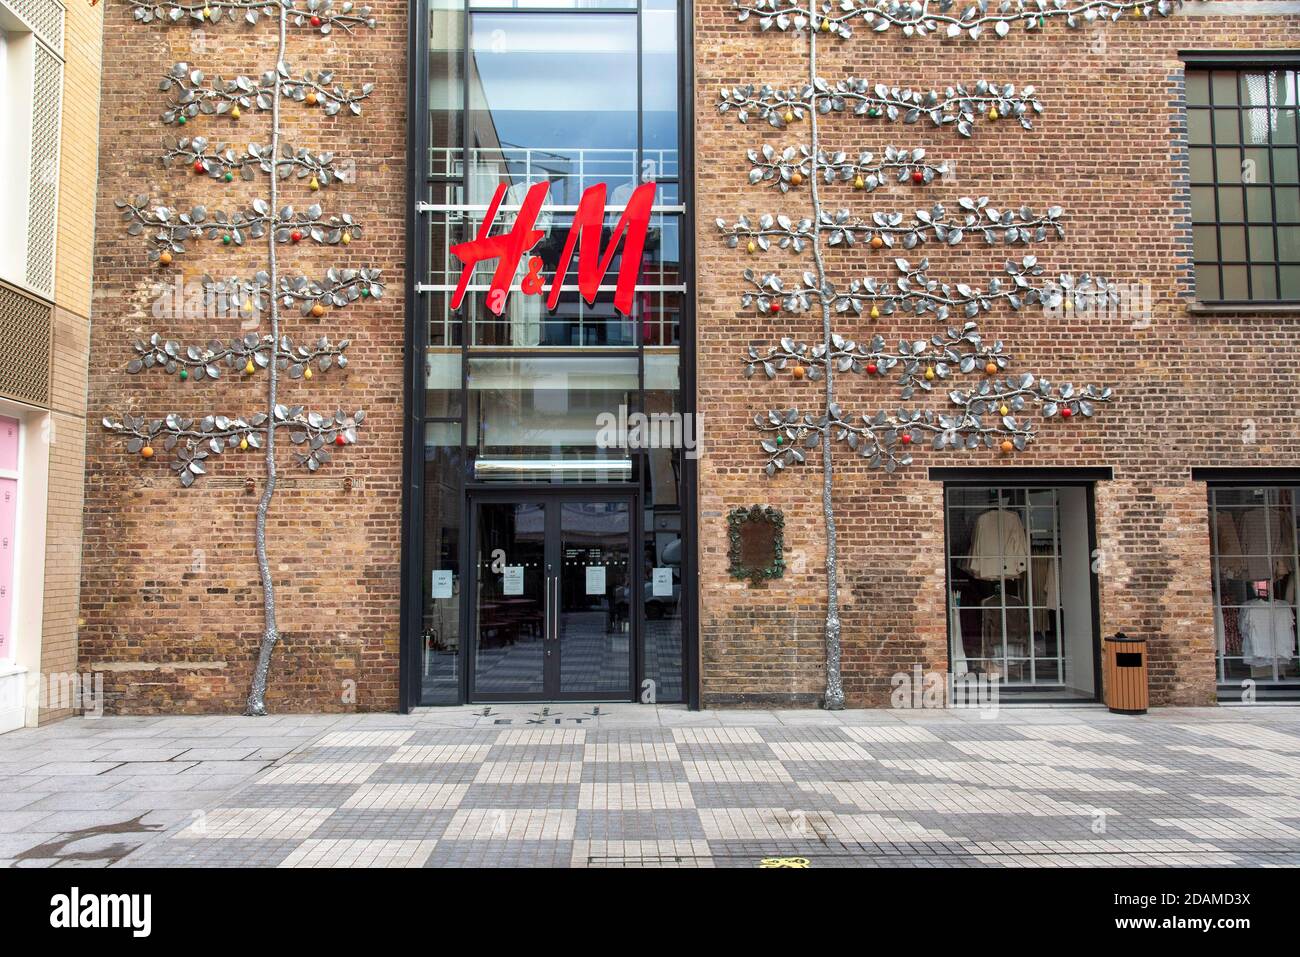 The H&M shop in London's Covent Garden with vines & leaves made of metal  seen outside Stock Photo - Alamy